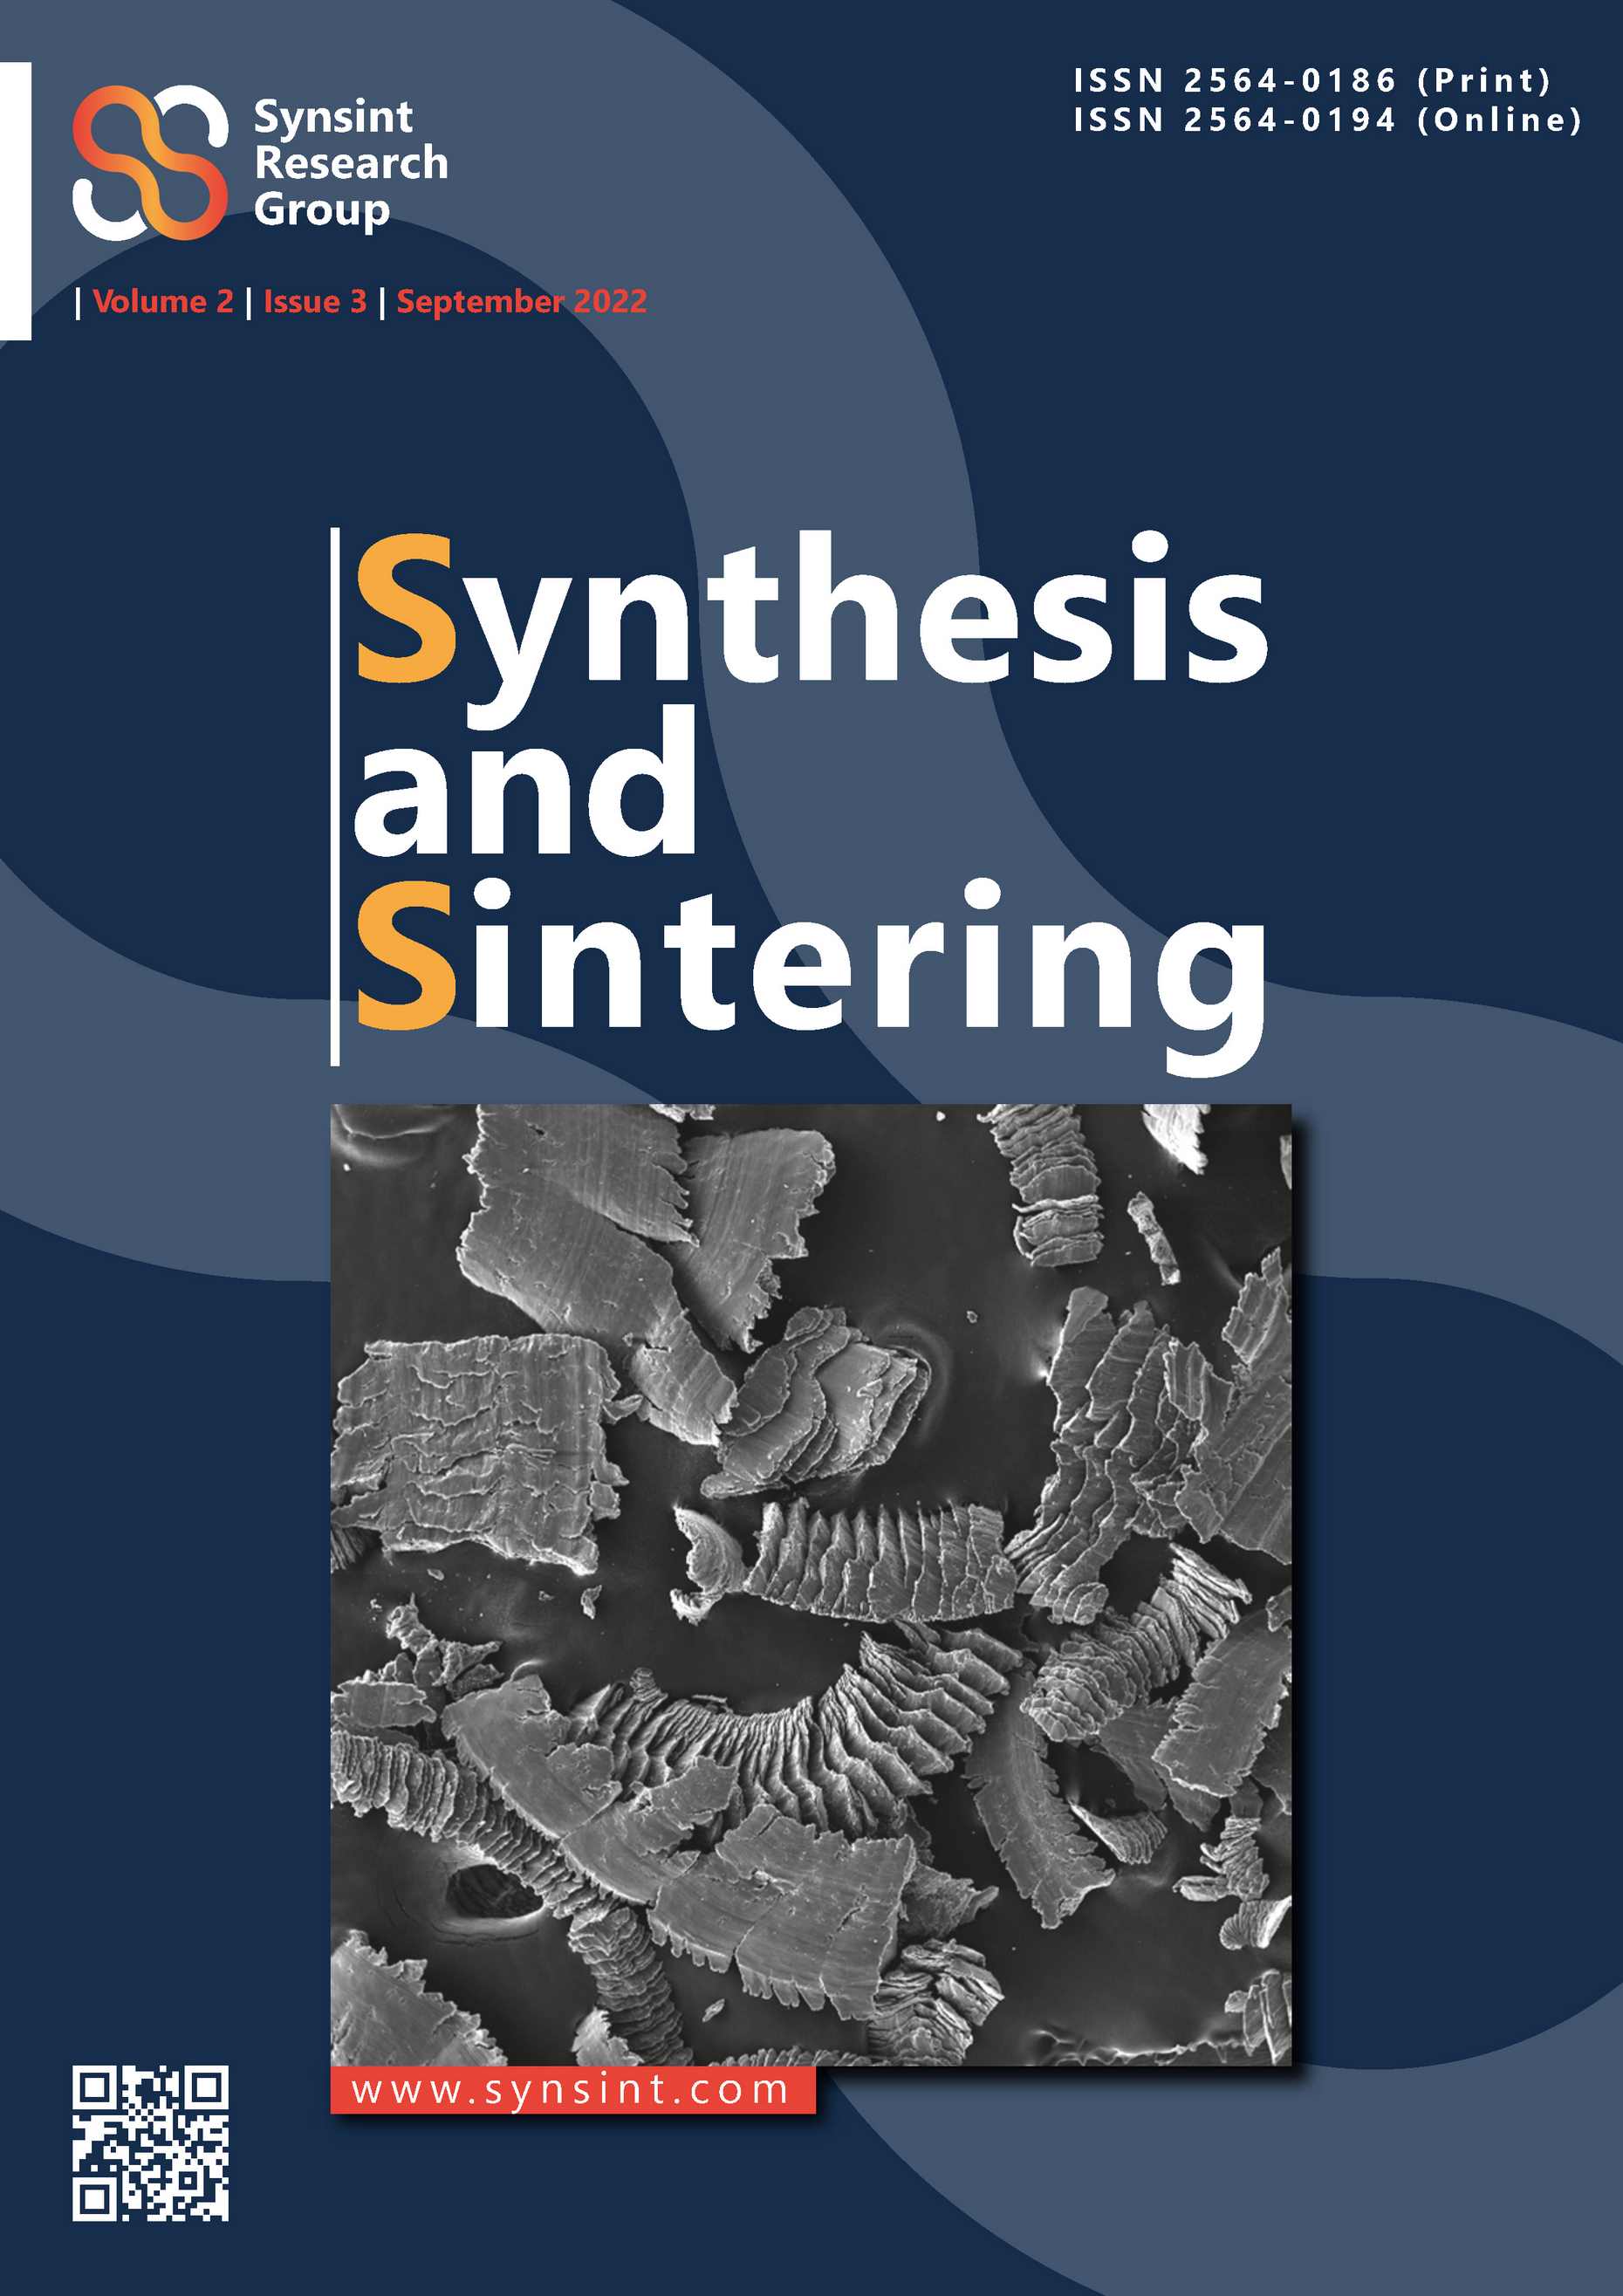 Synthesis and Sintering Vol. 2 No. 3 (2022)